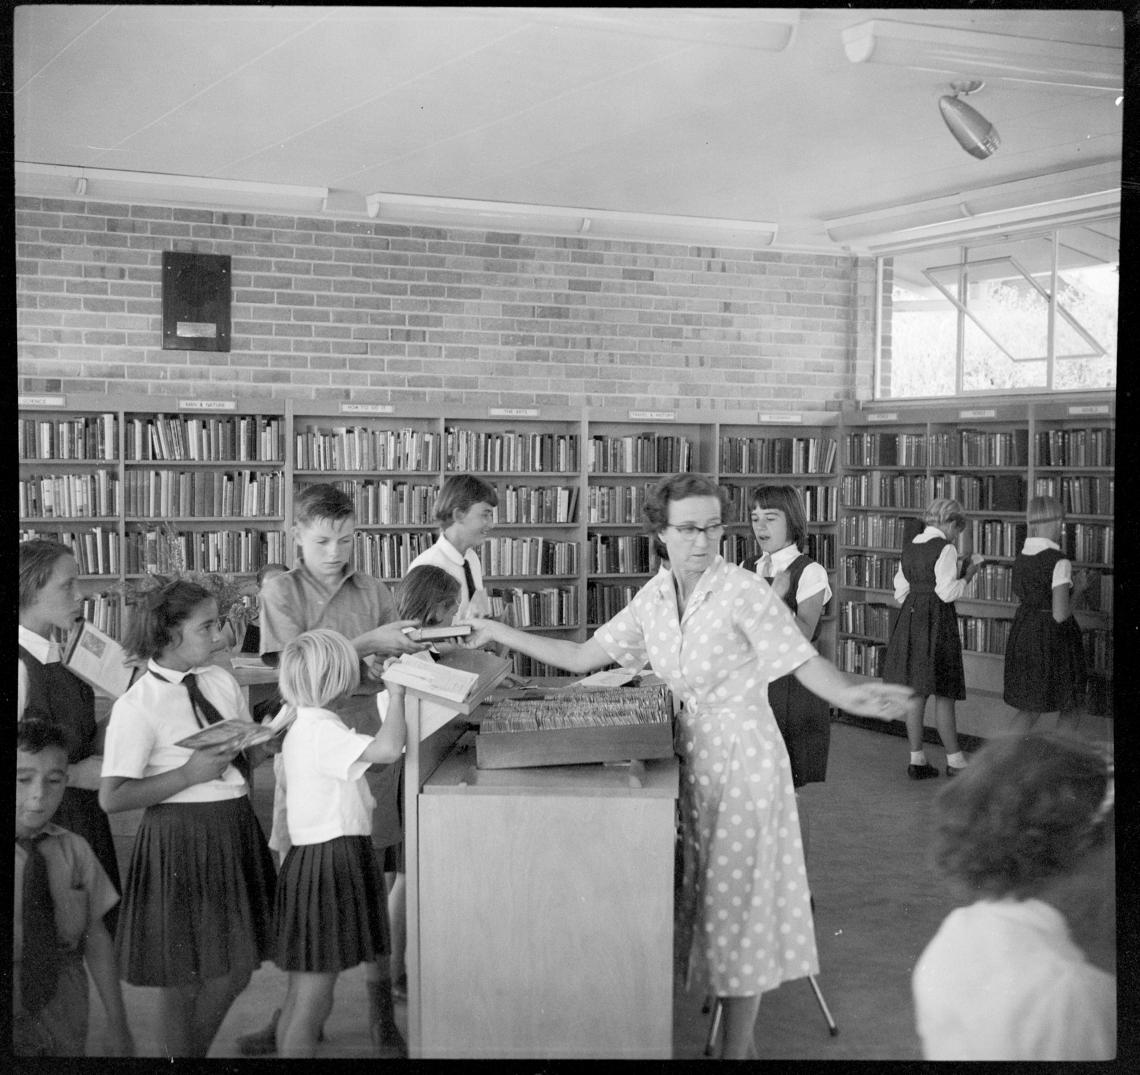 Librarian Patricia Morris lending out books at Kwinana Public Library 1959